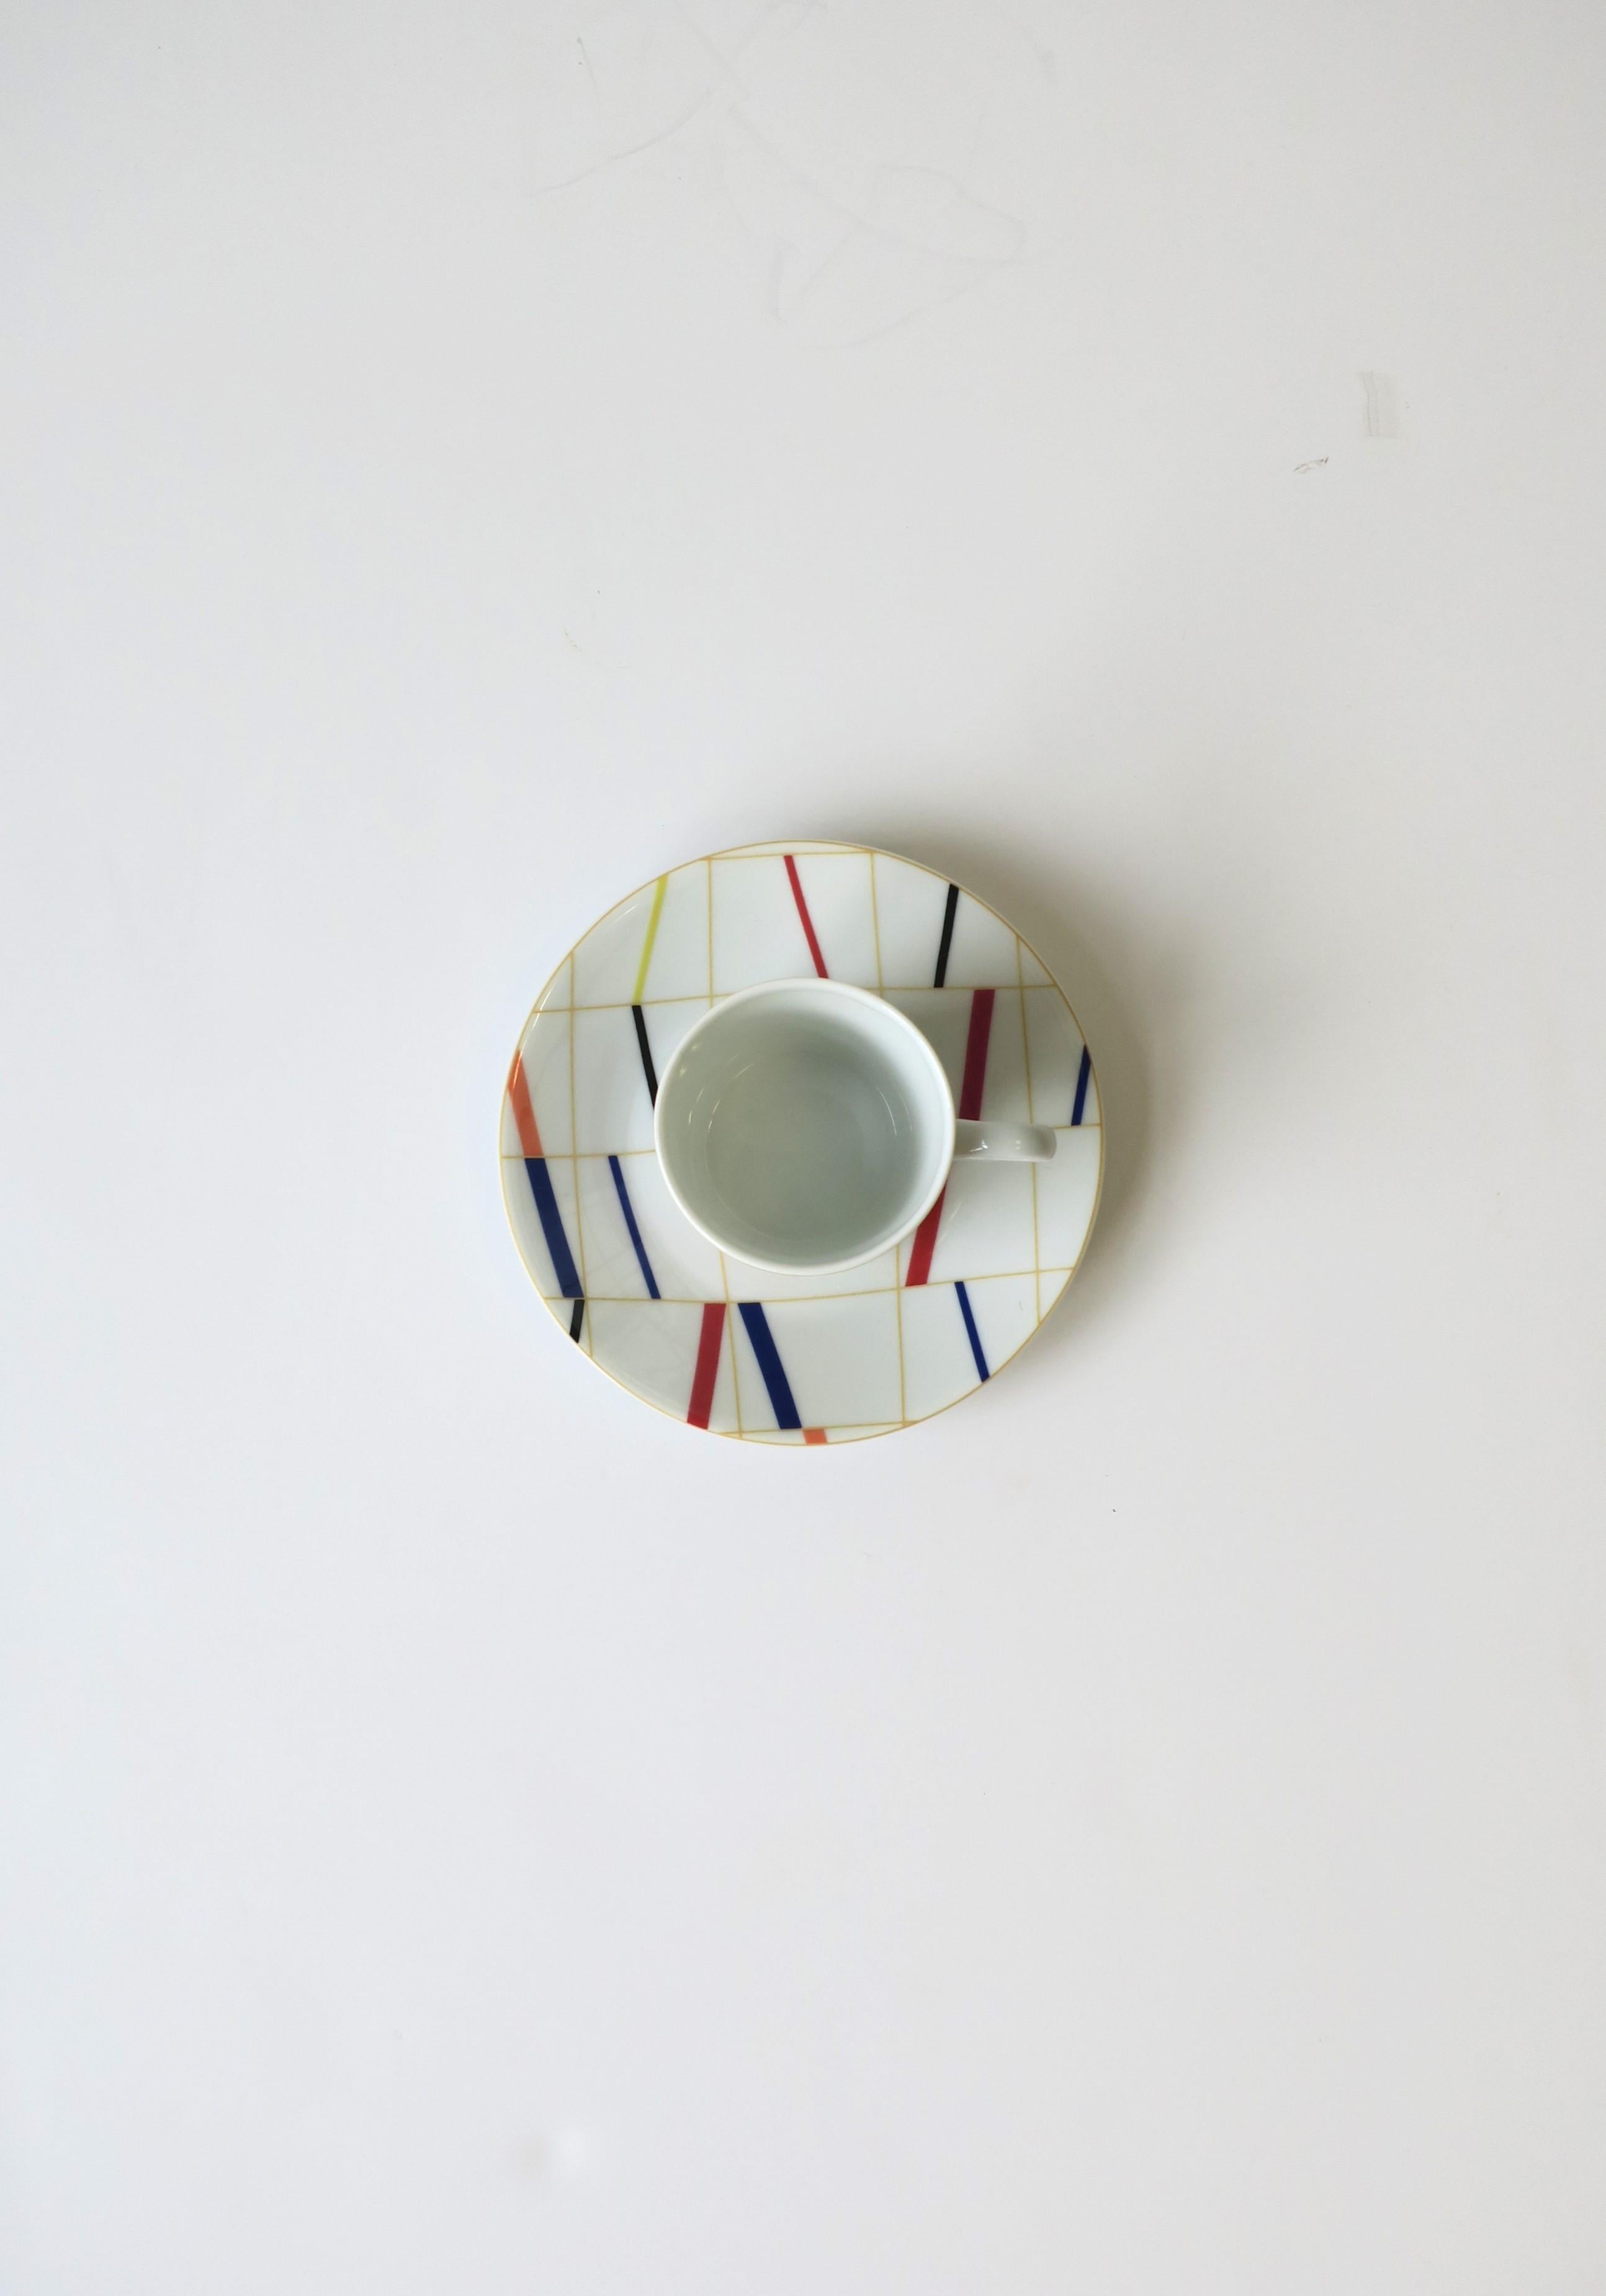 20th Century French Porcelain Espresso Coffee or Tea Demitasse Cup Saucer w/Abstract Design For Sale